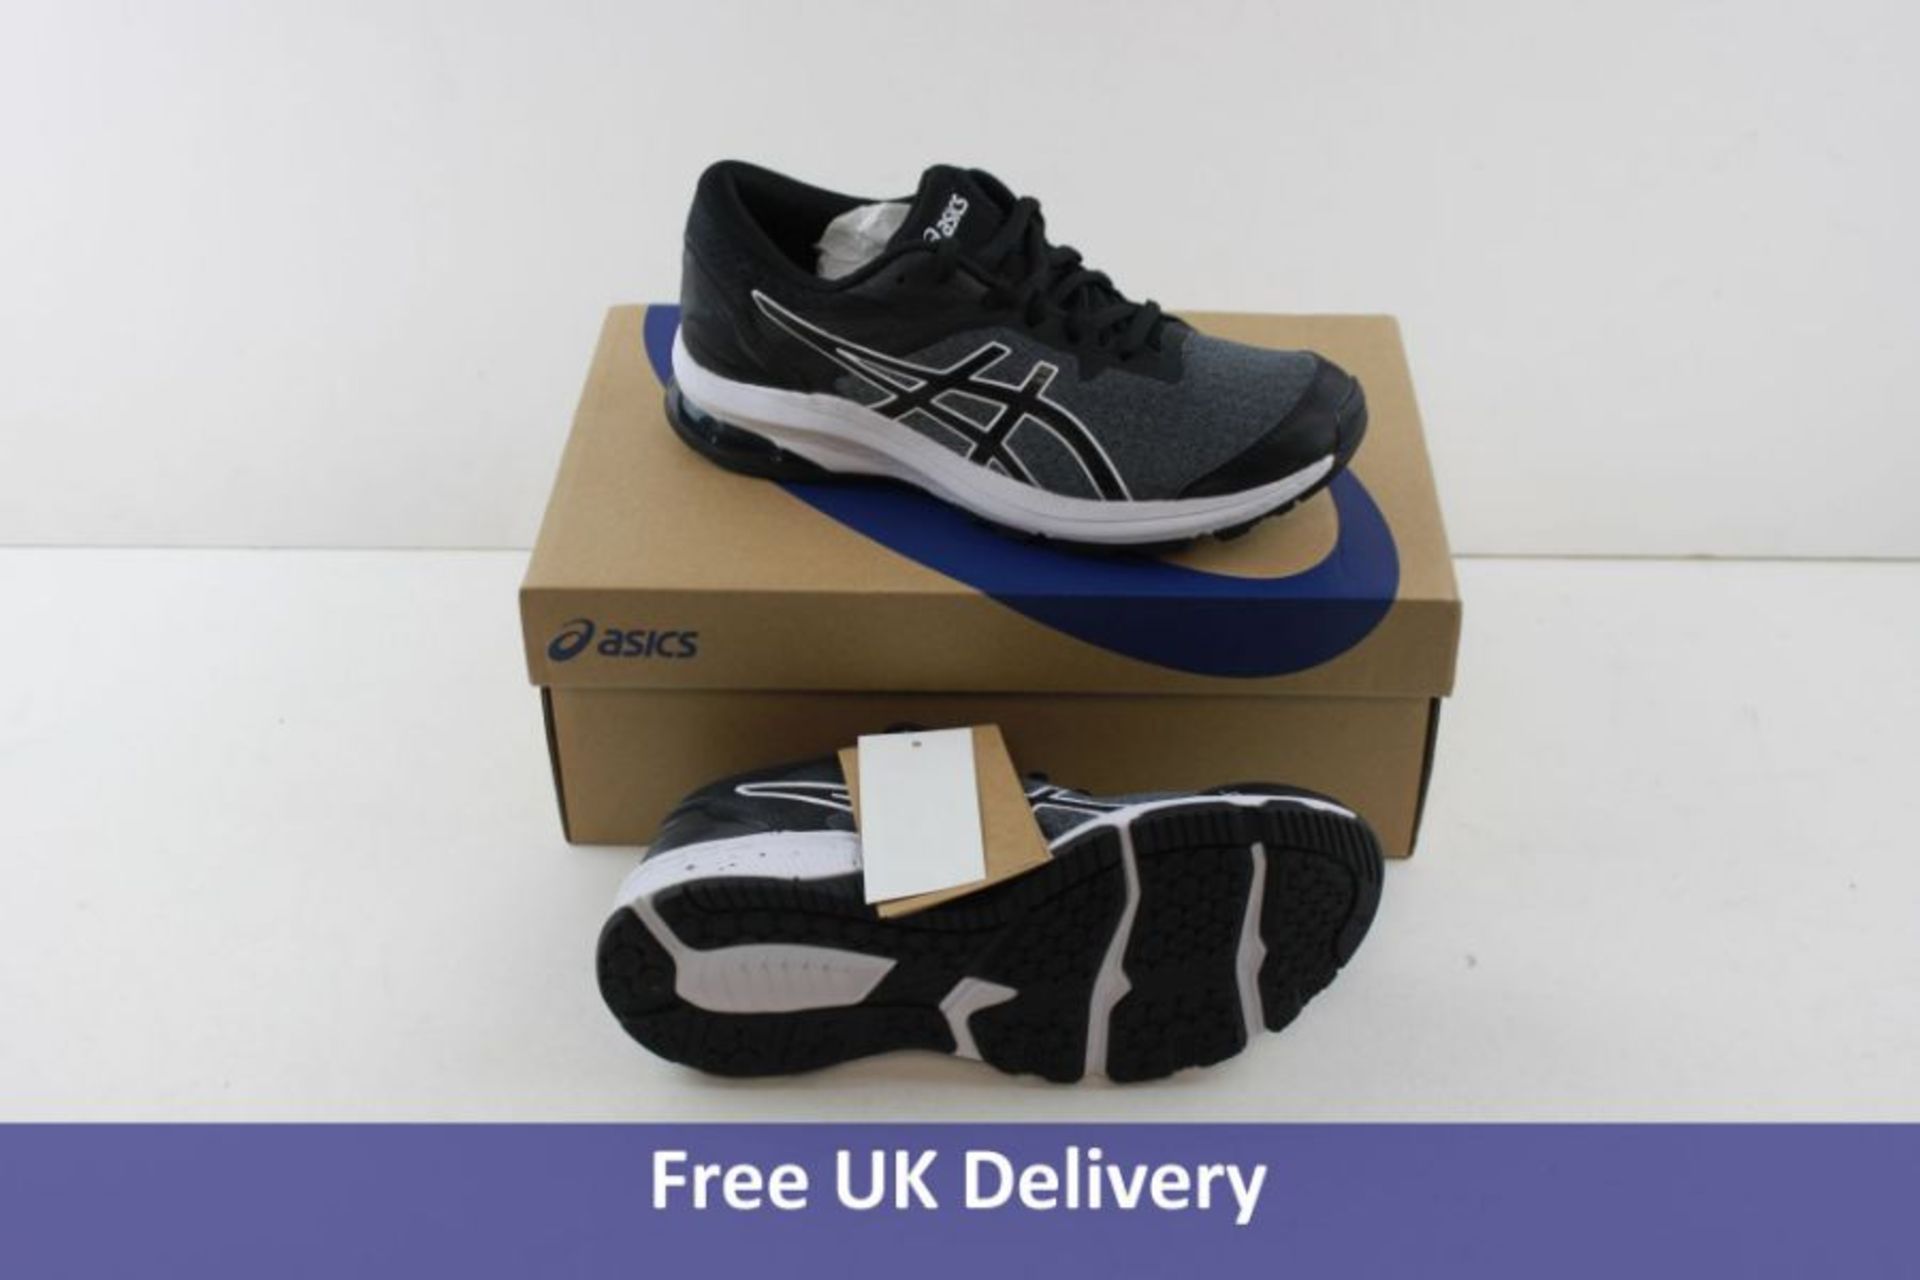 Asics Kid's GT-1000 10 GS Trainers, Black and White, UK 4.5